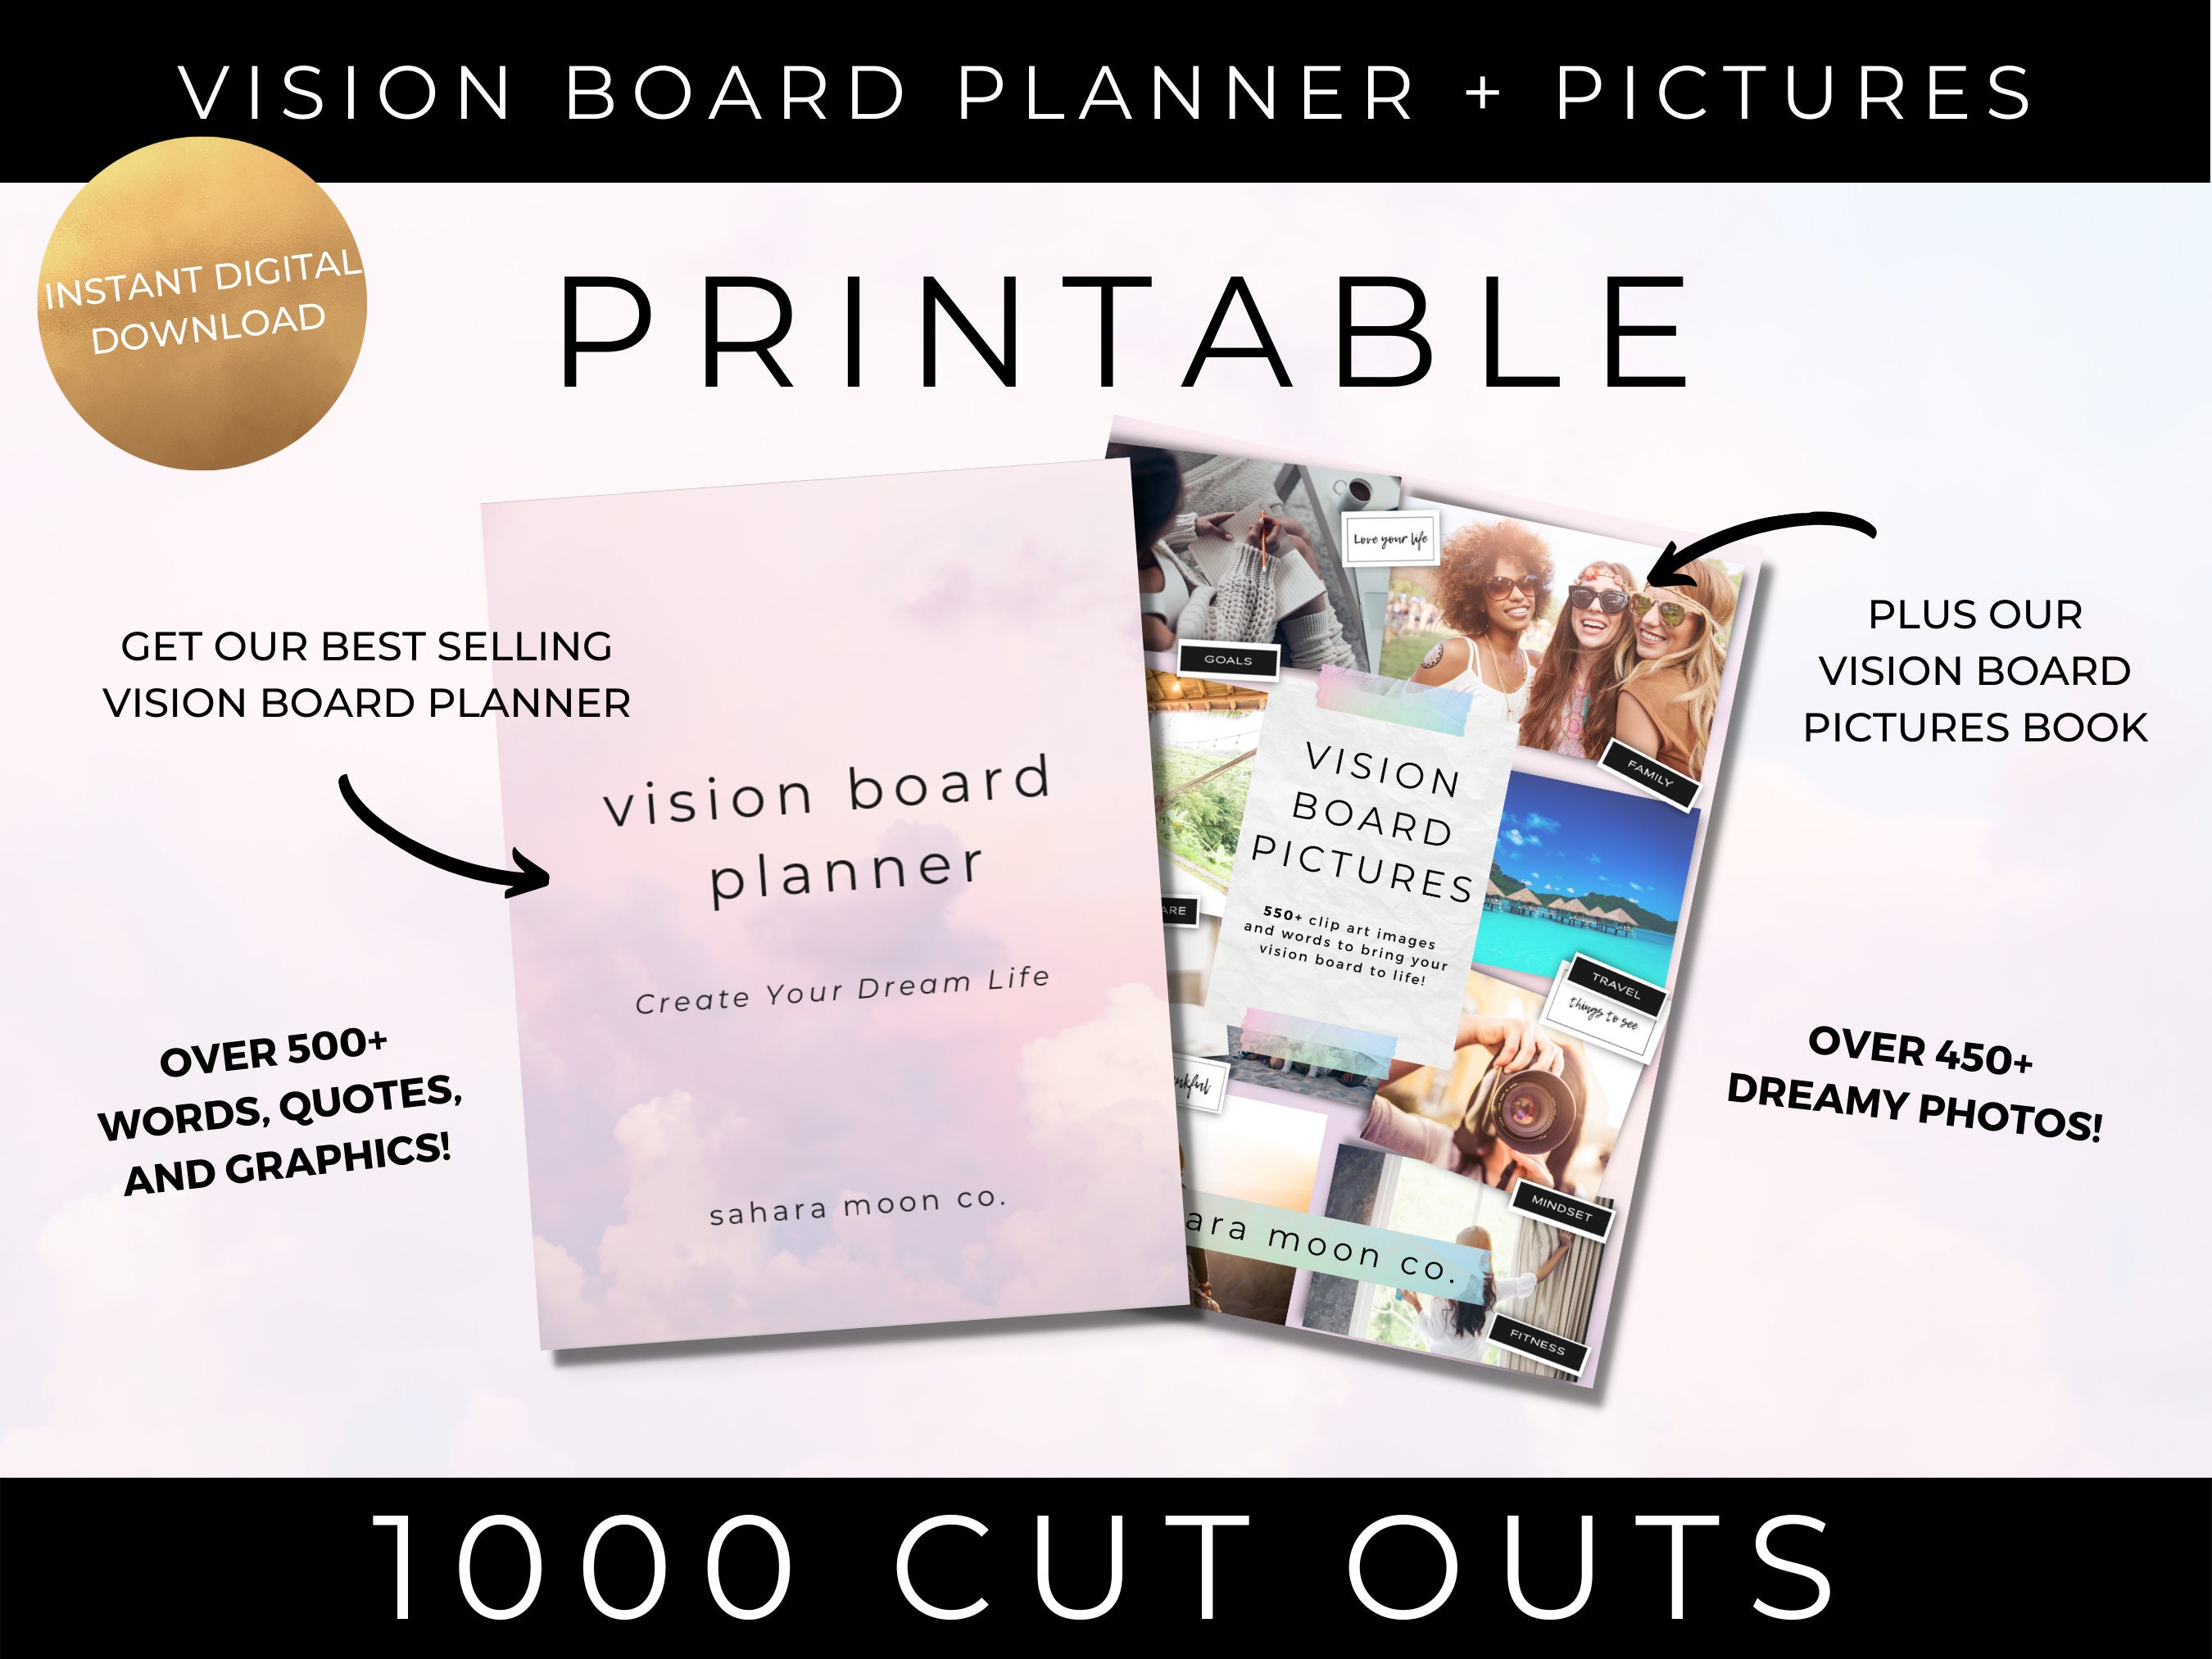 Lovet Planners Vision Board Graphics Book - Manifest Your Dreams with Stunning Visuals, Clip Art, and Graphics for Your Vision Board Book